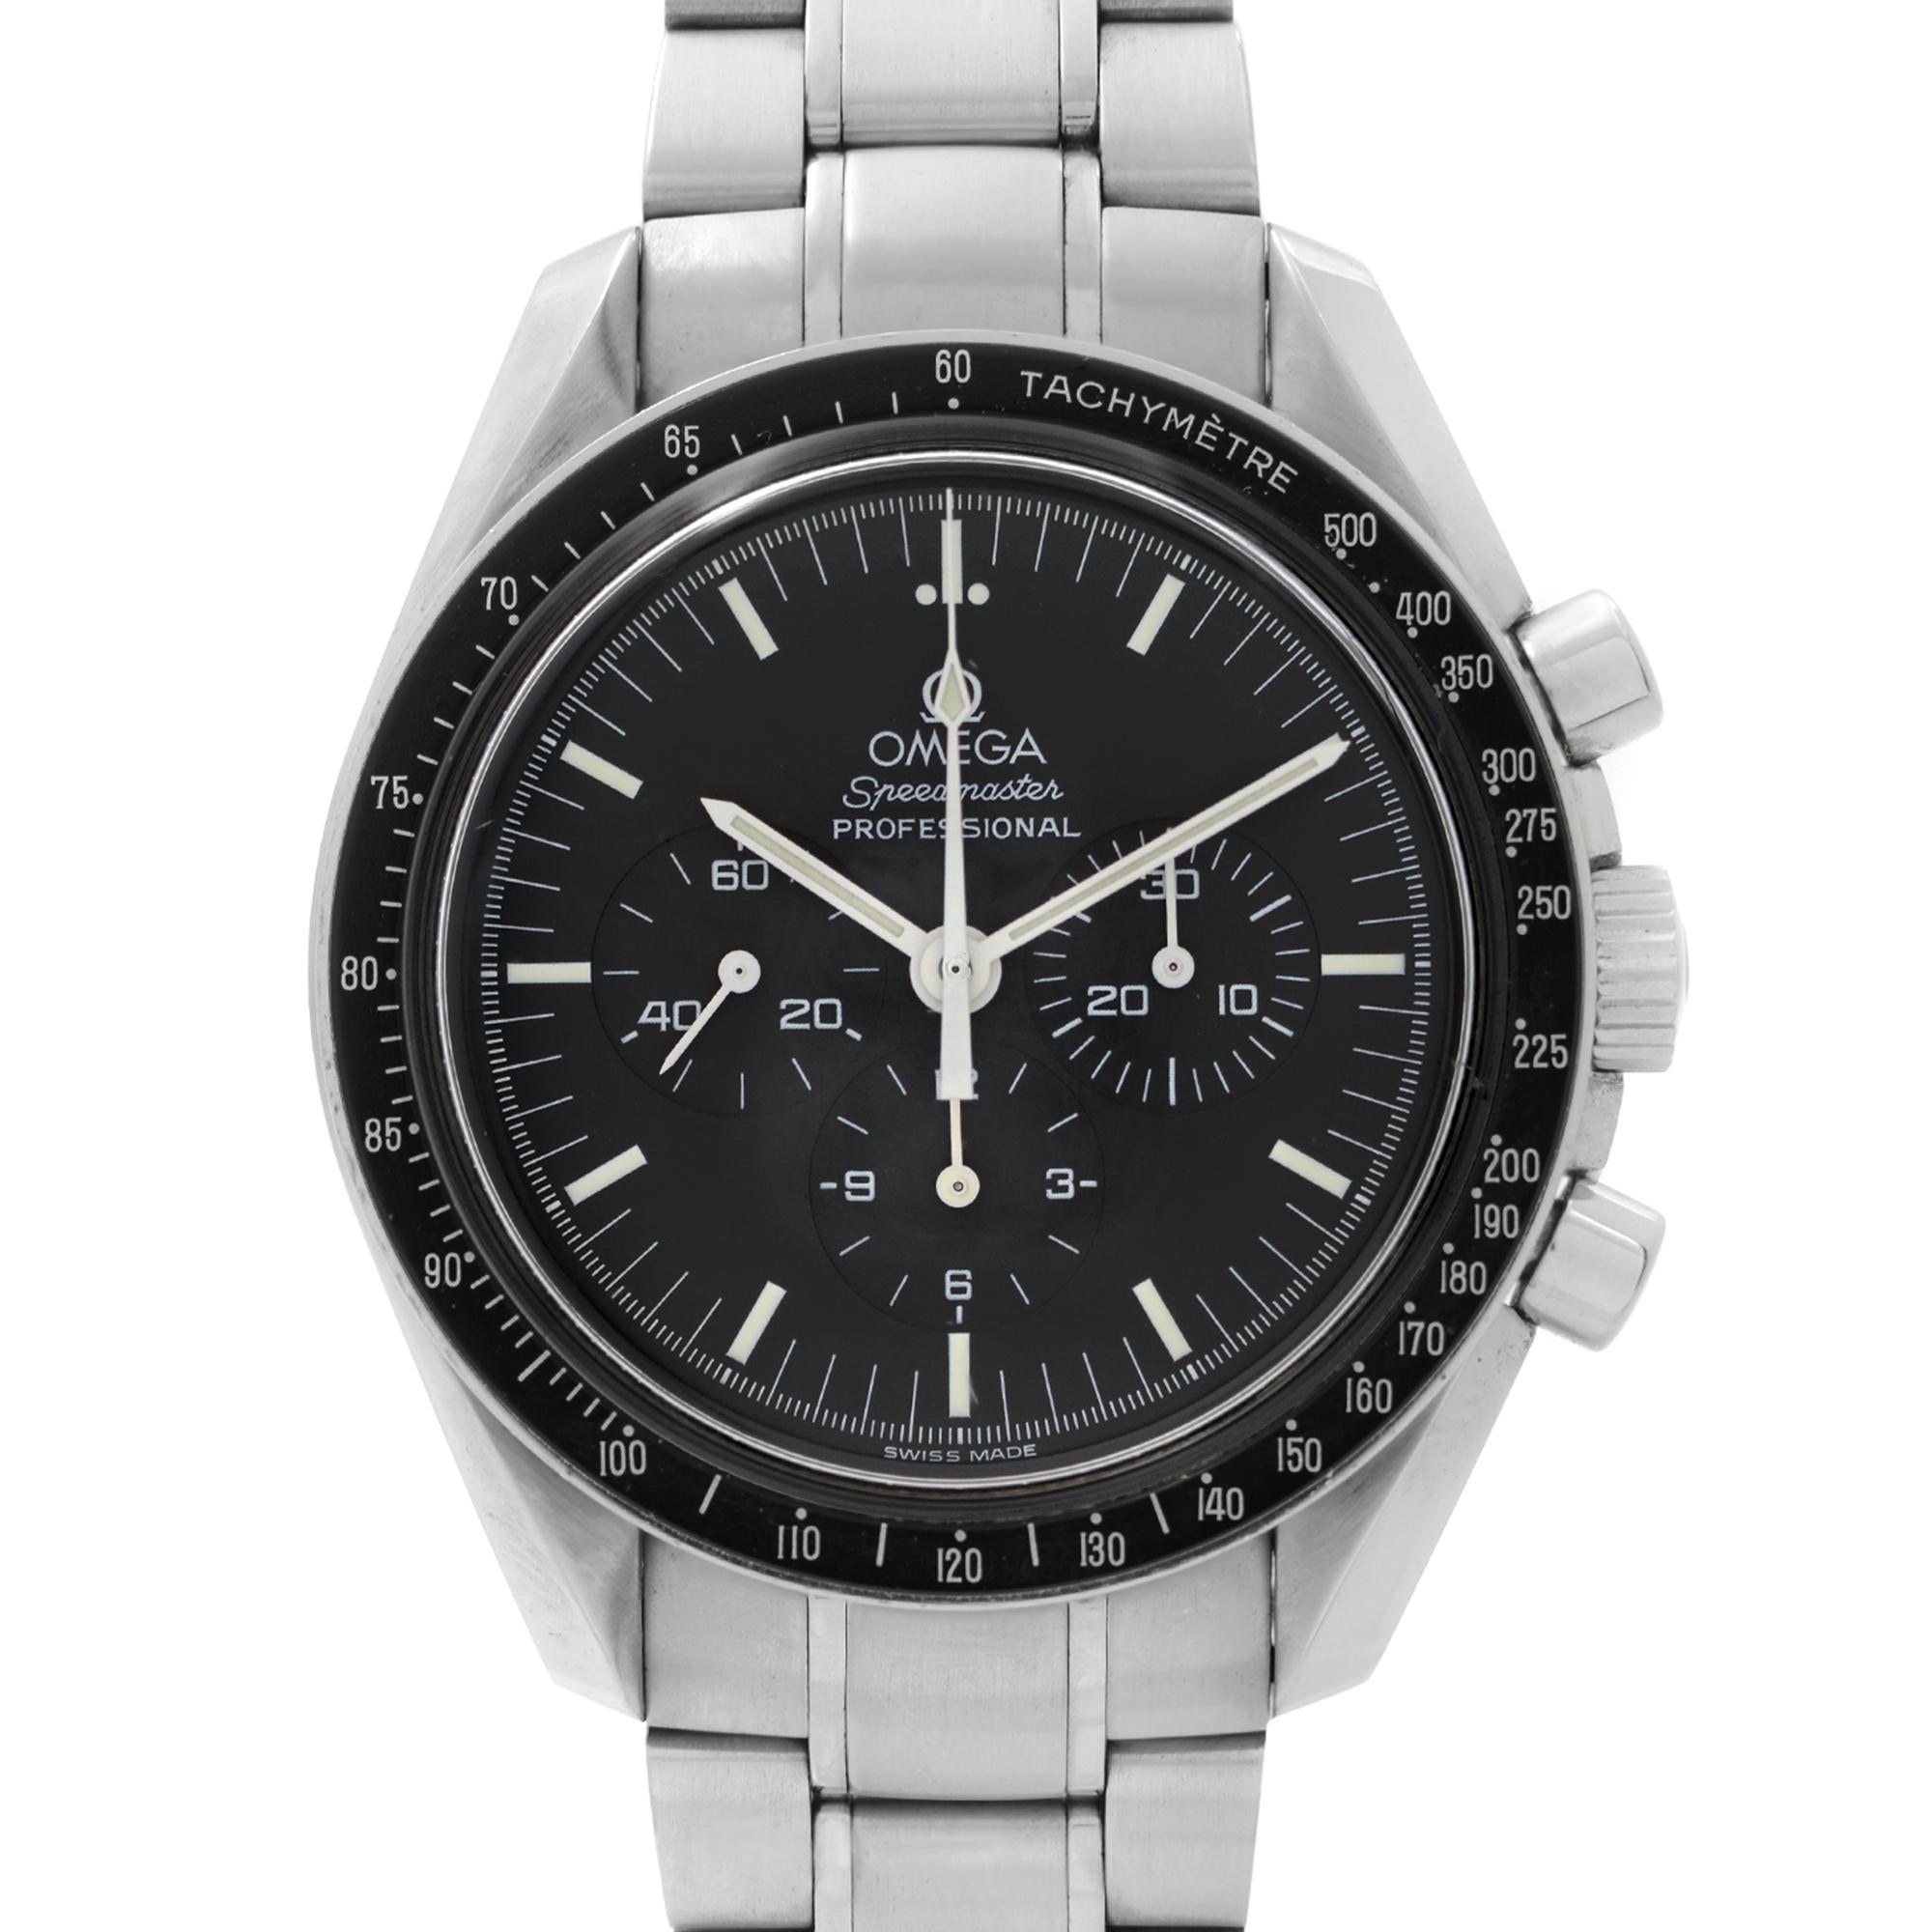 Pre-owned Omega Speedmaster Professional Moonwatch Steel Black Dial Manual-Wind Men's Watch 3572.50.00. This Watch was Produced in 1998. Features: Brushed Stainless Steel Case and Steel Bracelet. Fixed Black Bezel with Tachymetre. Black Dial with